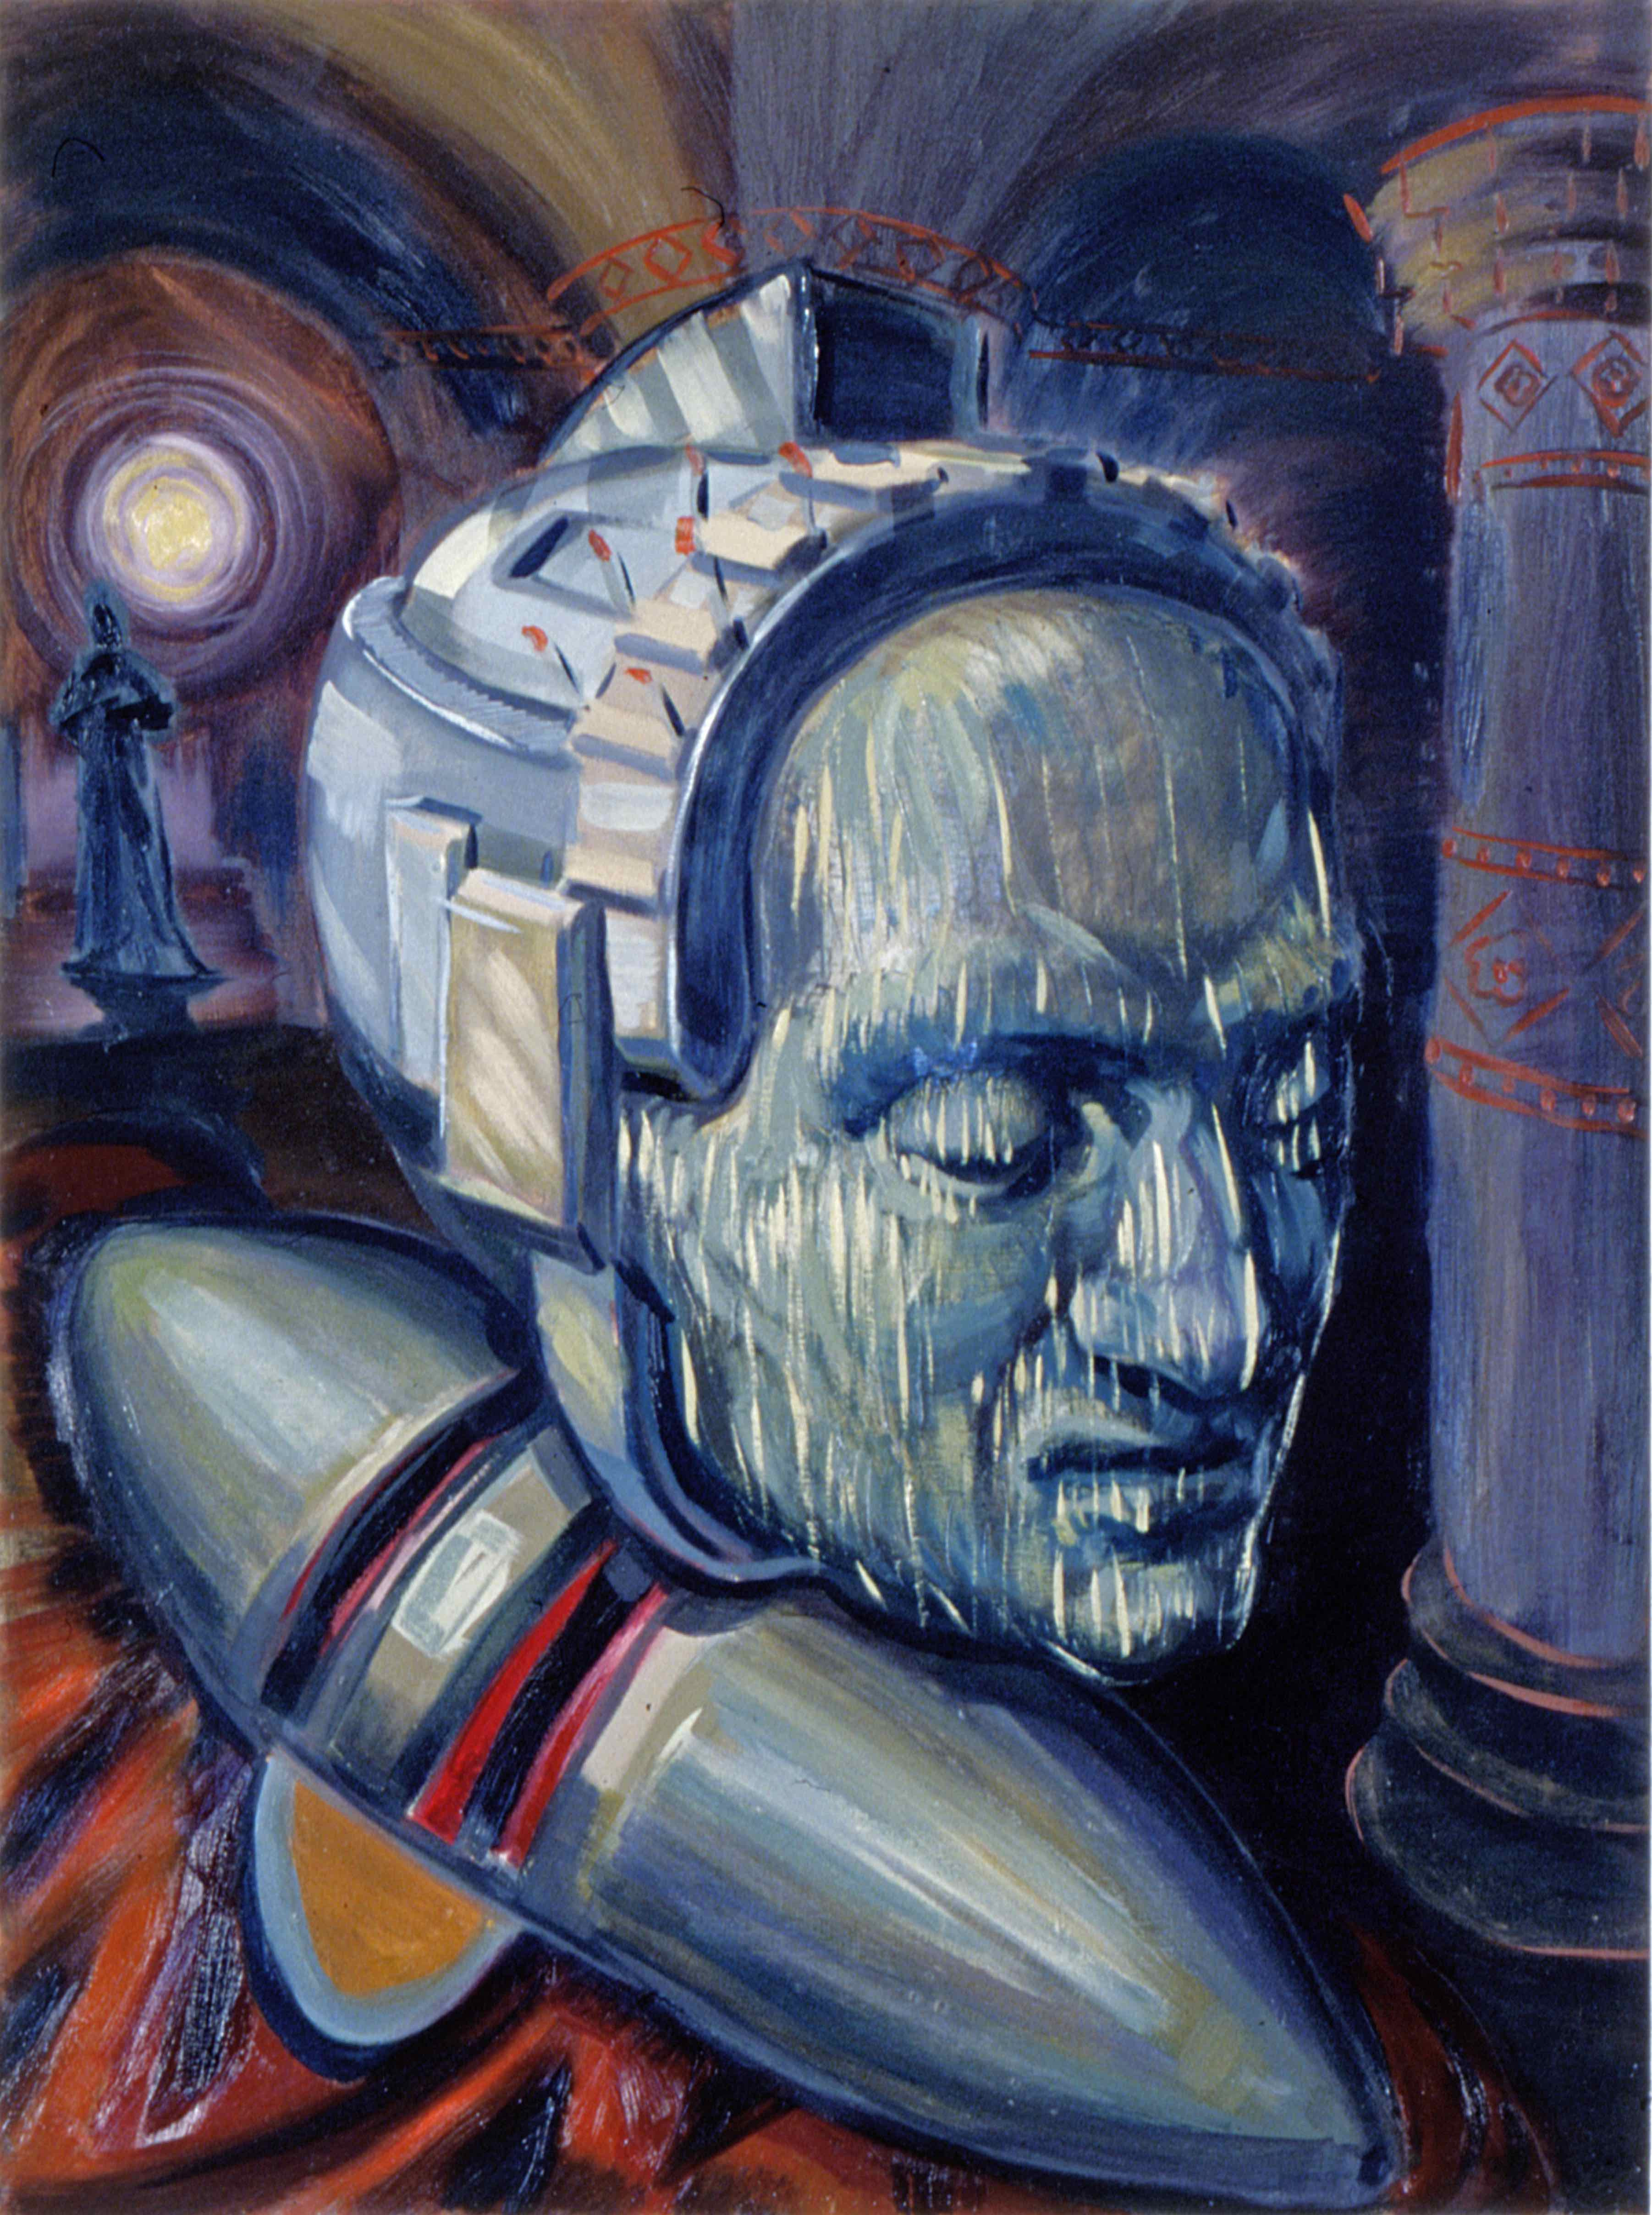 ROBO SAINT, painted by Vince Mancuso in 1992, oil on canvas, 3x4 feet. Private collection